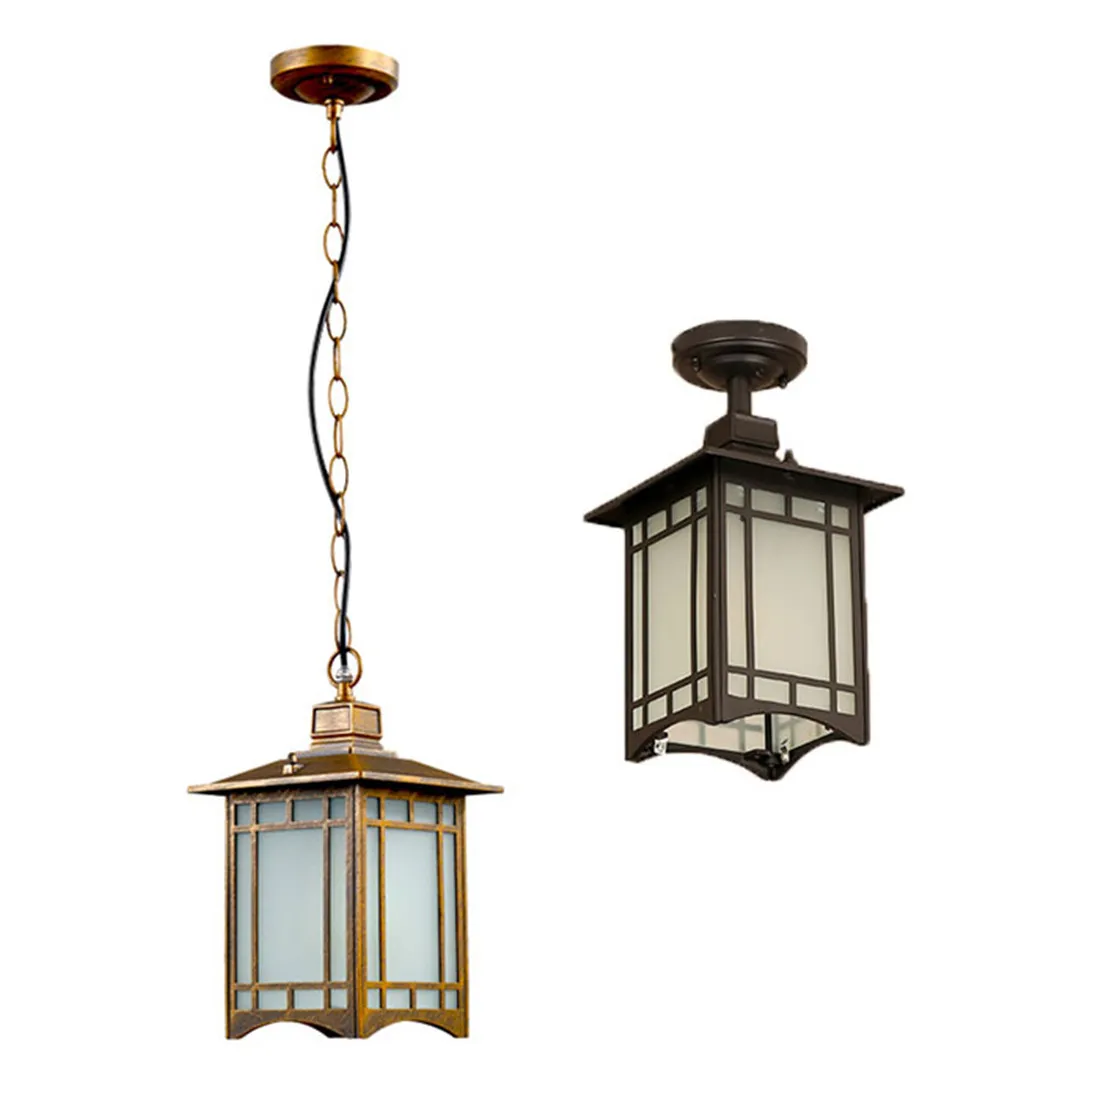 Rustic Outdoor Pendant Light Black Exterior Ceiling Porch Light Cast Aluminum Housing with Frosted Glass Shade for Gazebo Entry